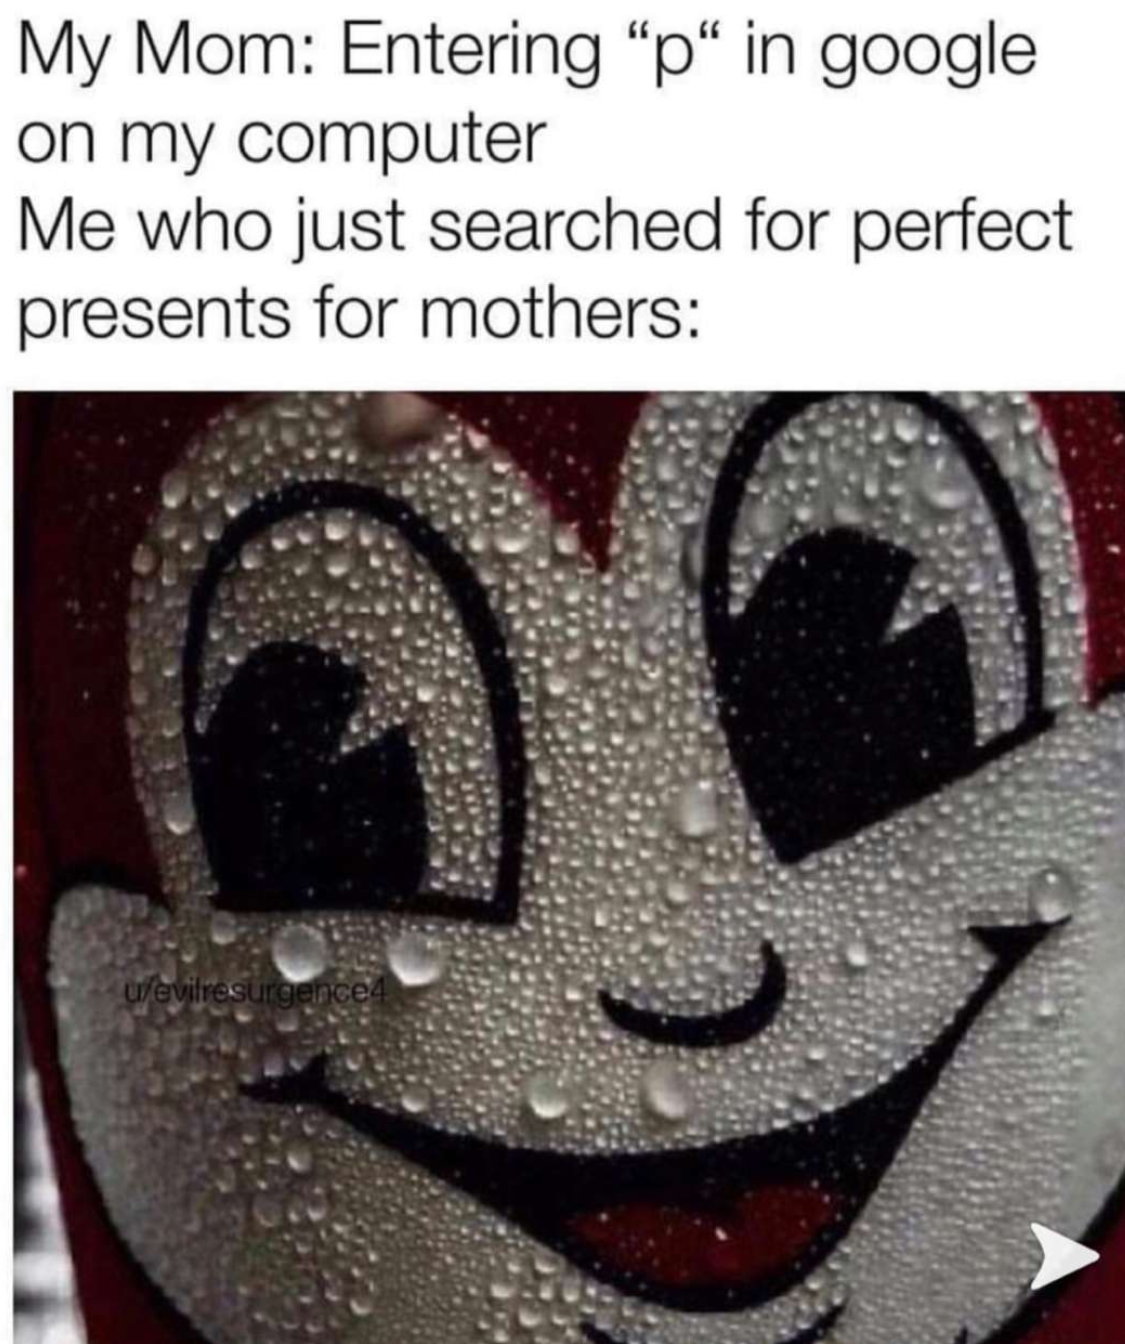 wholesome meme - successful presentation - My Mom Entering p in google on my computer Me who just searched for perfect presents for mothers